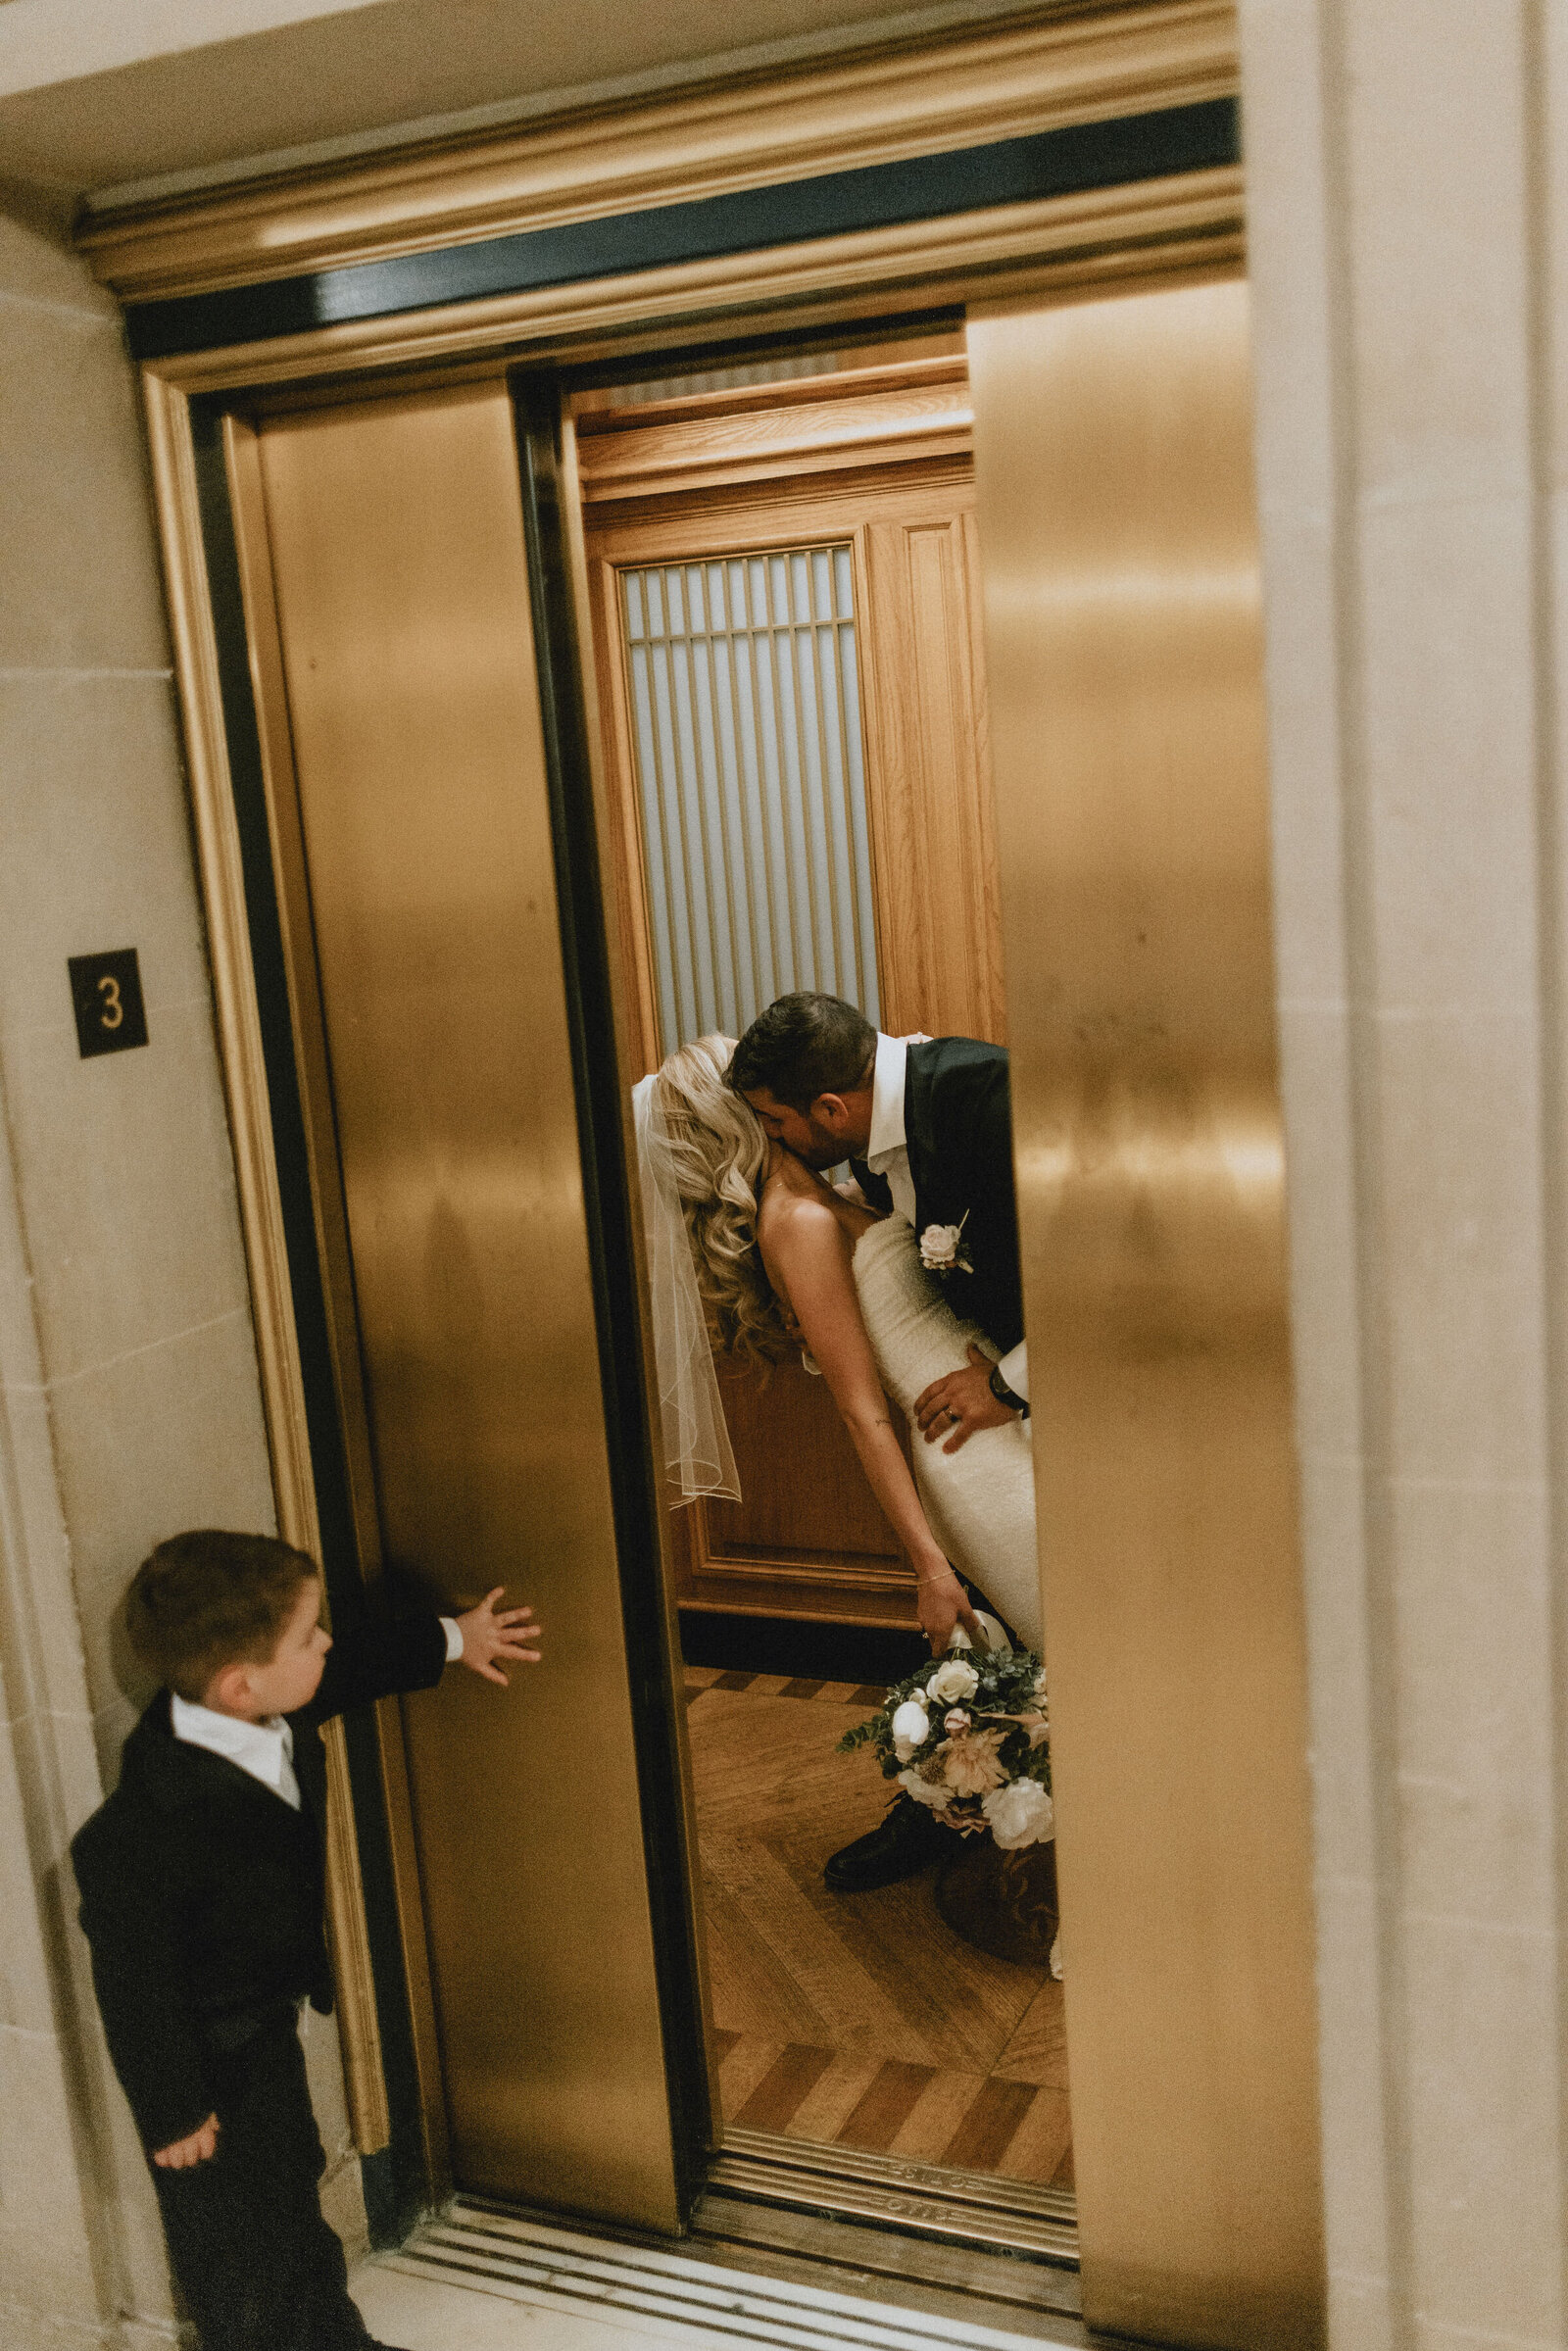 A bride and groom share a kiss in an elevator during a photoshoot, holding a floral bouquet, as a young boy watches them, all inside a vintage elevator with wood paneling in San Francisco City Hall.